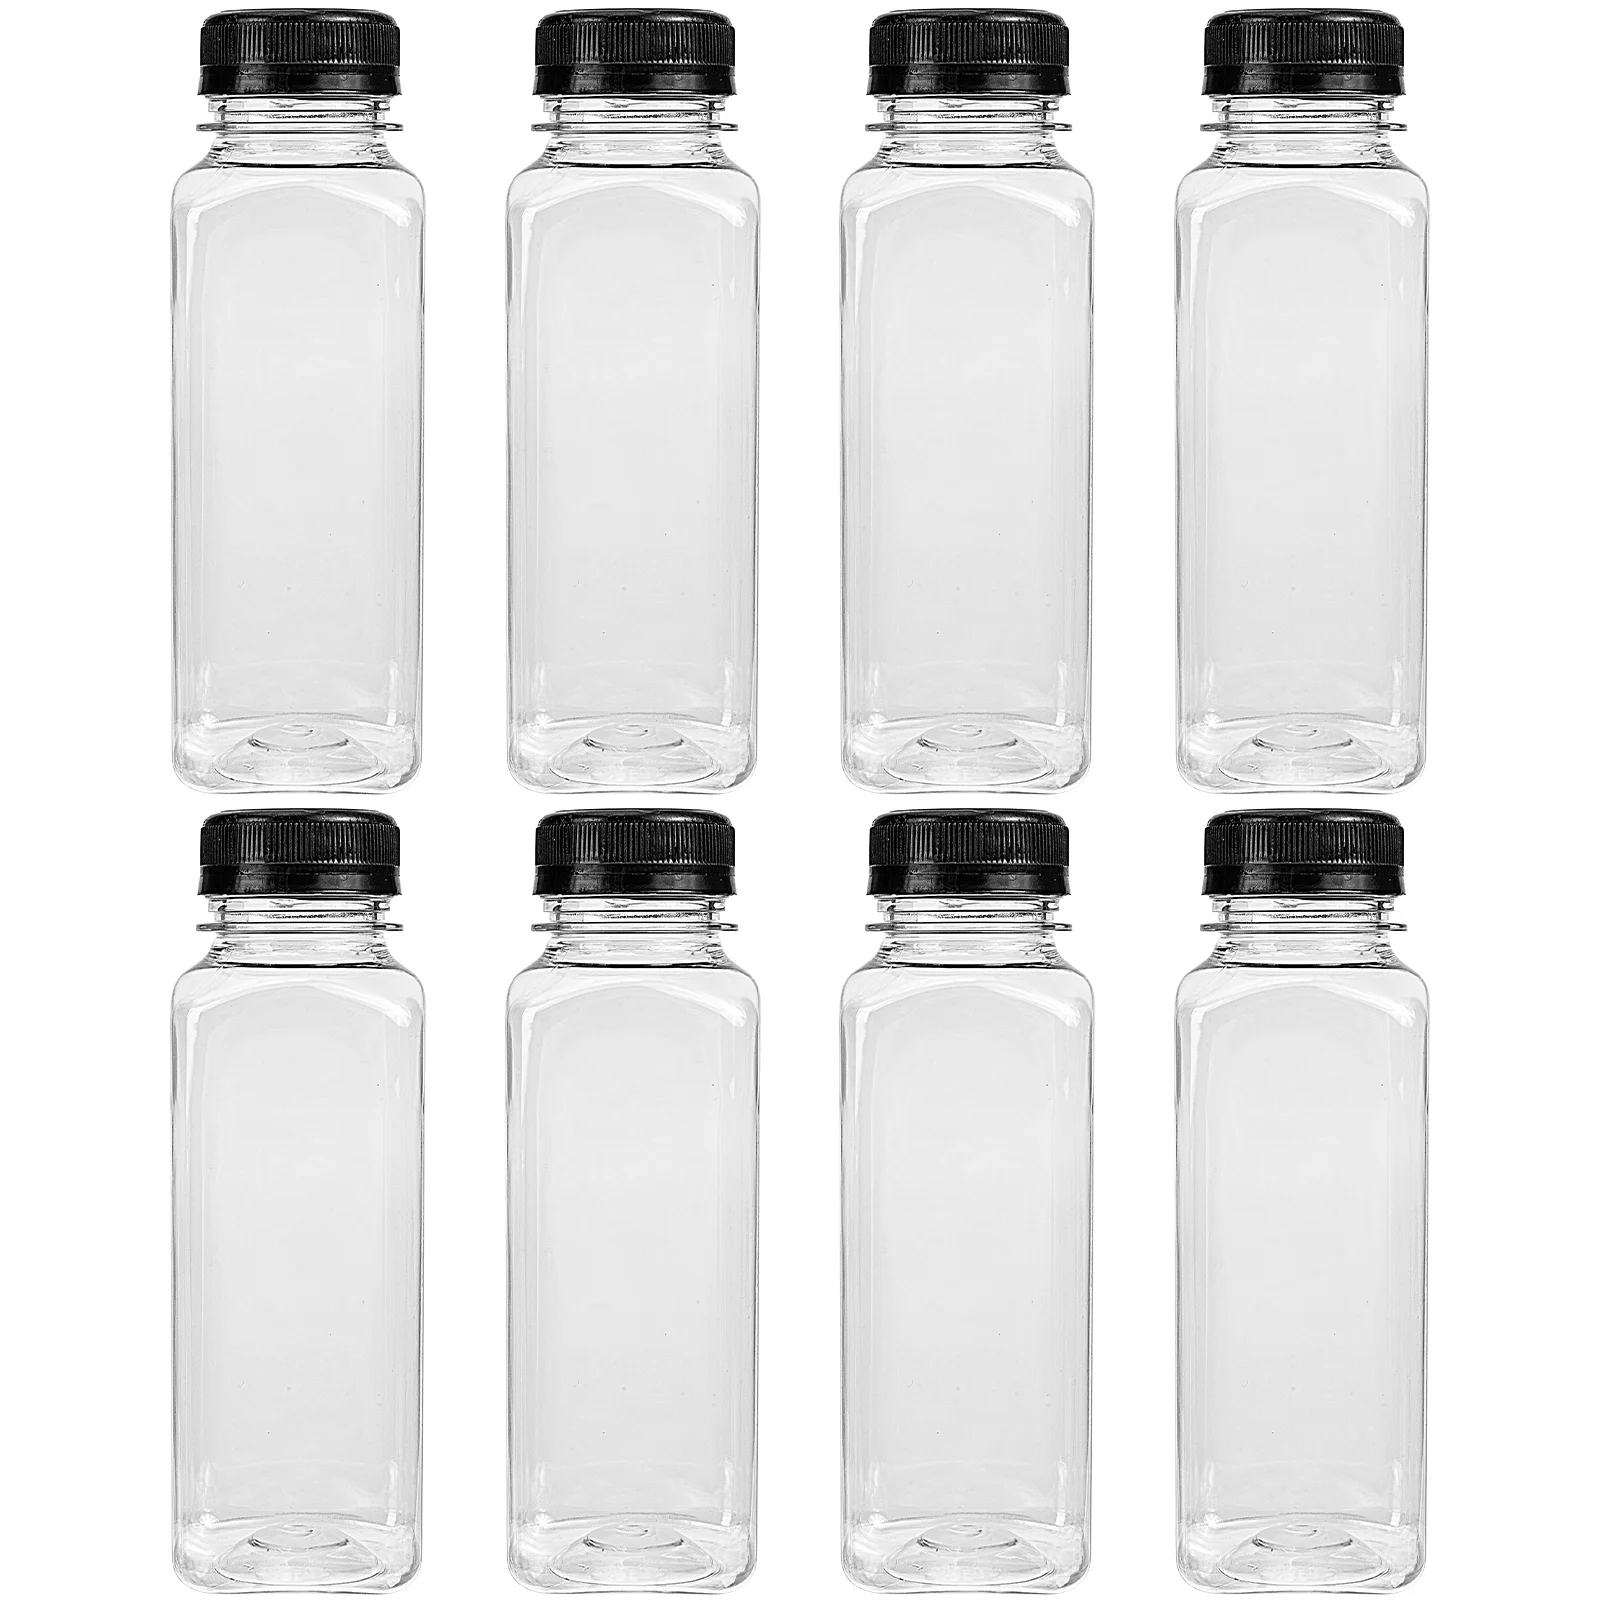 

Bottles Bottle Plastic Drink Beverage Empty Milk Clear Containers Water Lids Party Mini Drinking Jugs Container Cap Smoothie